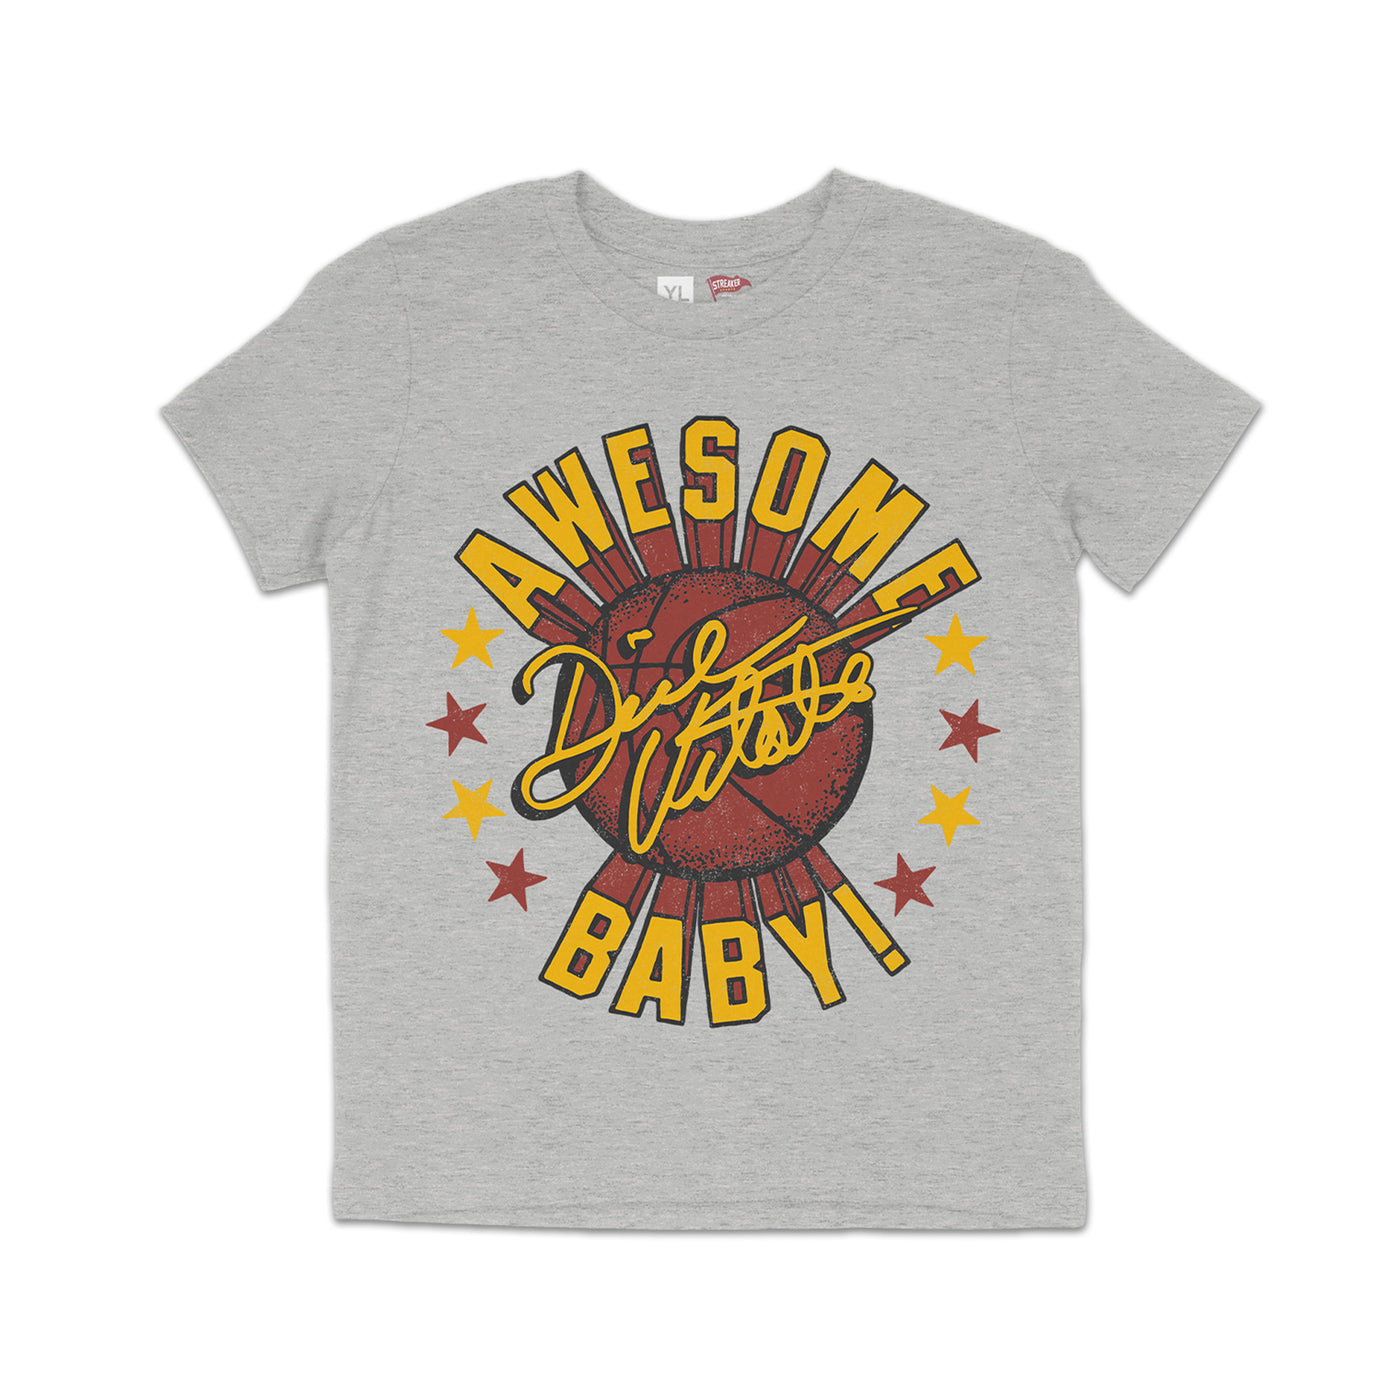 Dick Vitale Awesome Baby! Youth Tee - Streaker Sports